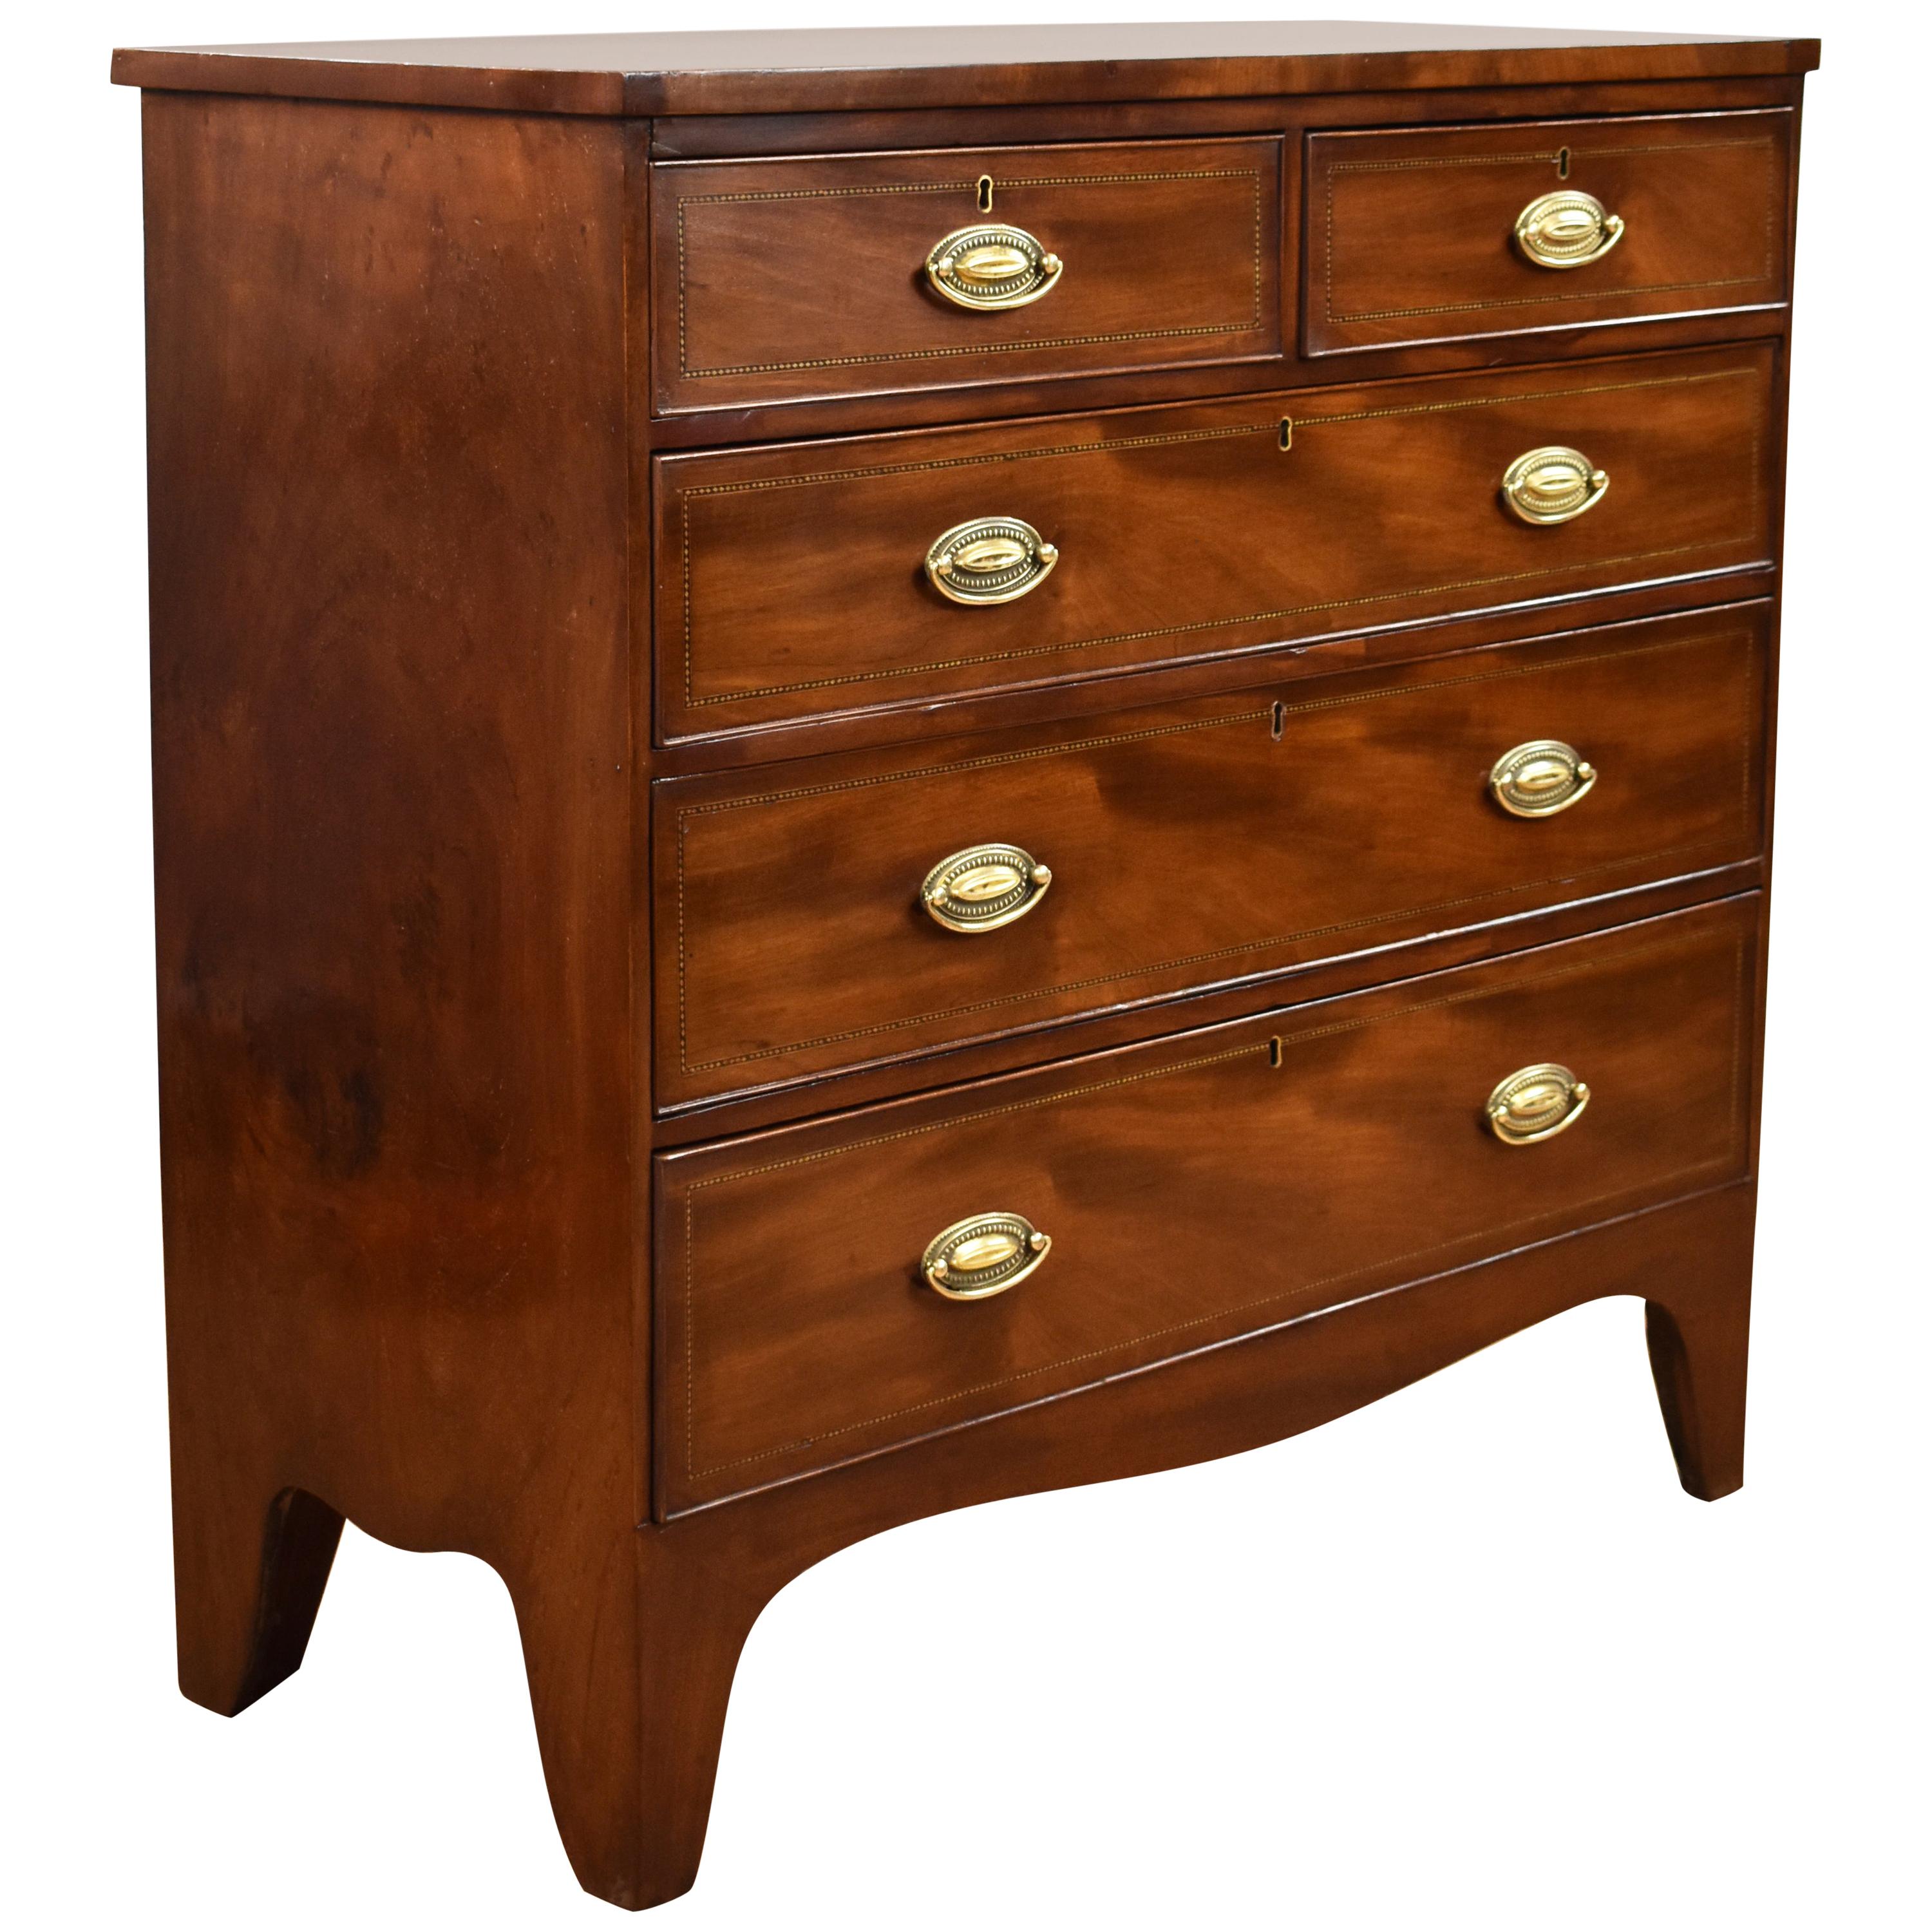 19th Century English Antique Mahogany and Inlaid Chest of Drawers